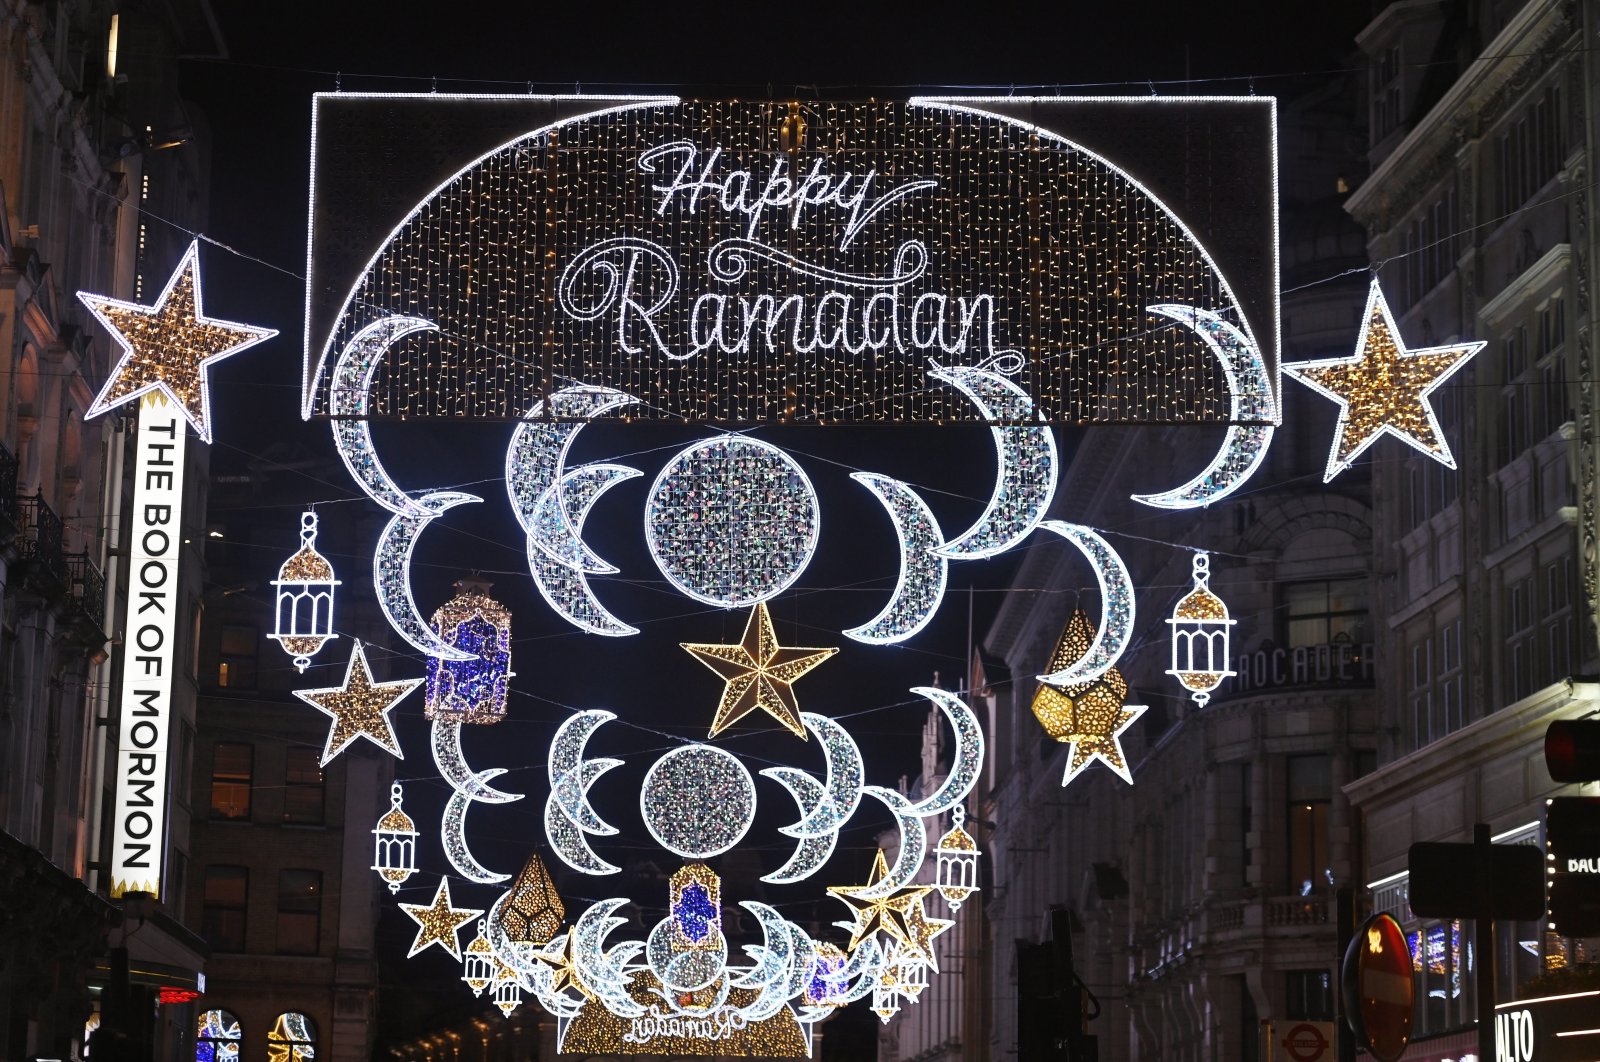 Lights celebrating the Muslim festival of Ramadan are displayed in the West End of London, U.K., March 23, 2023. (EPA Photo)